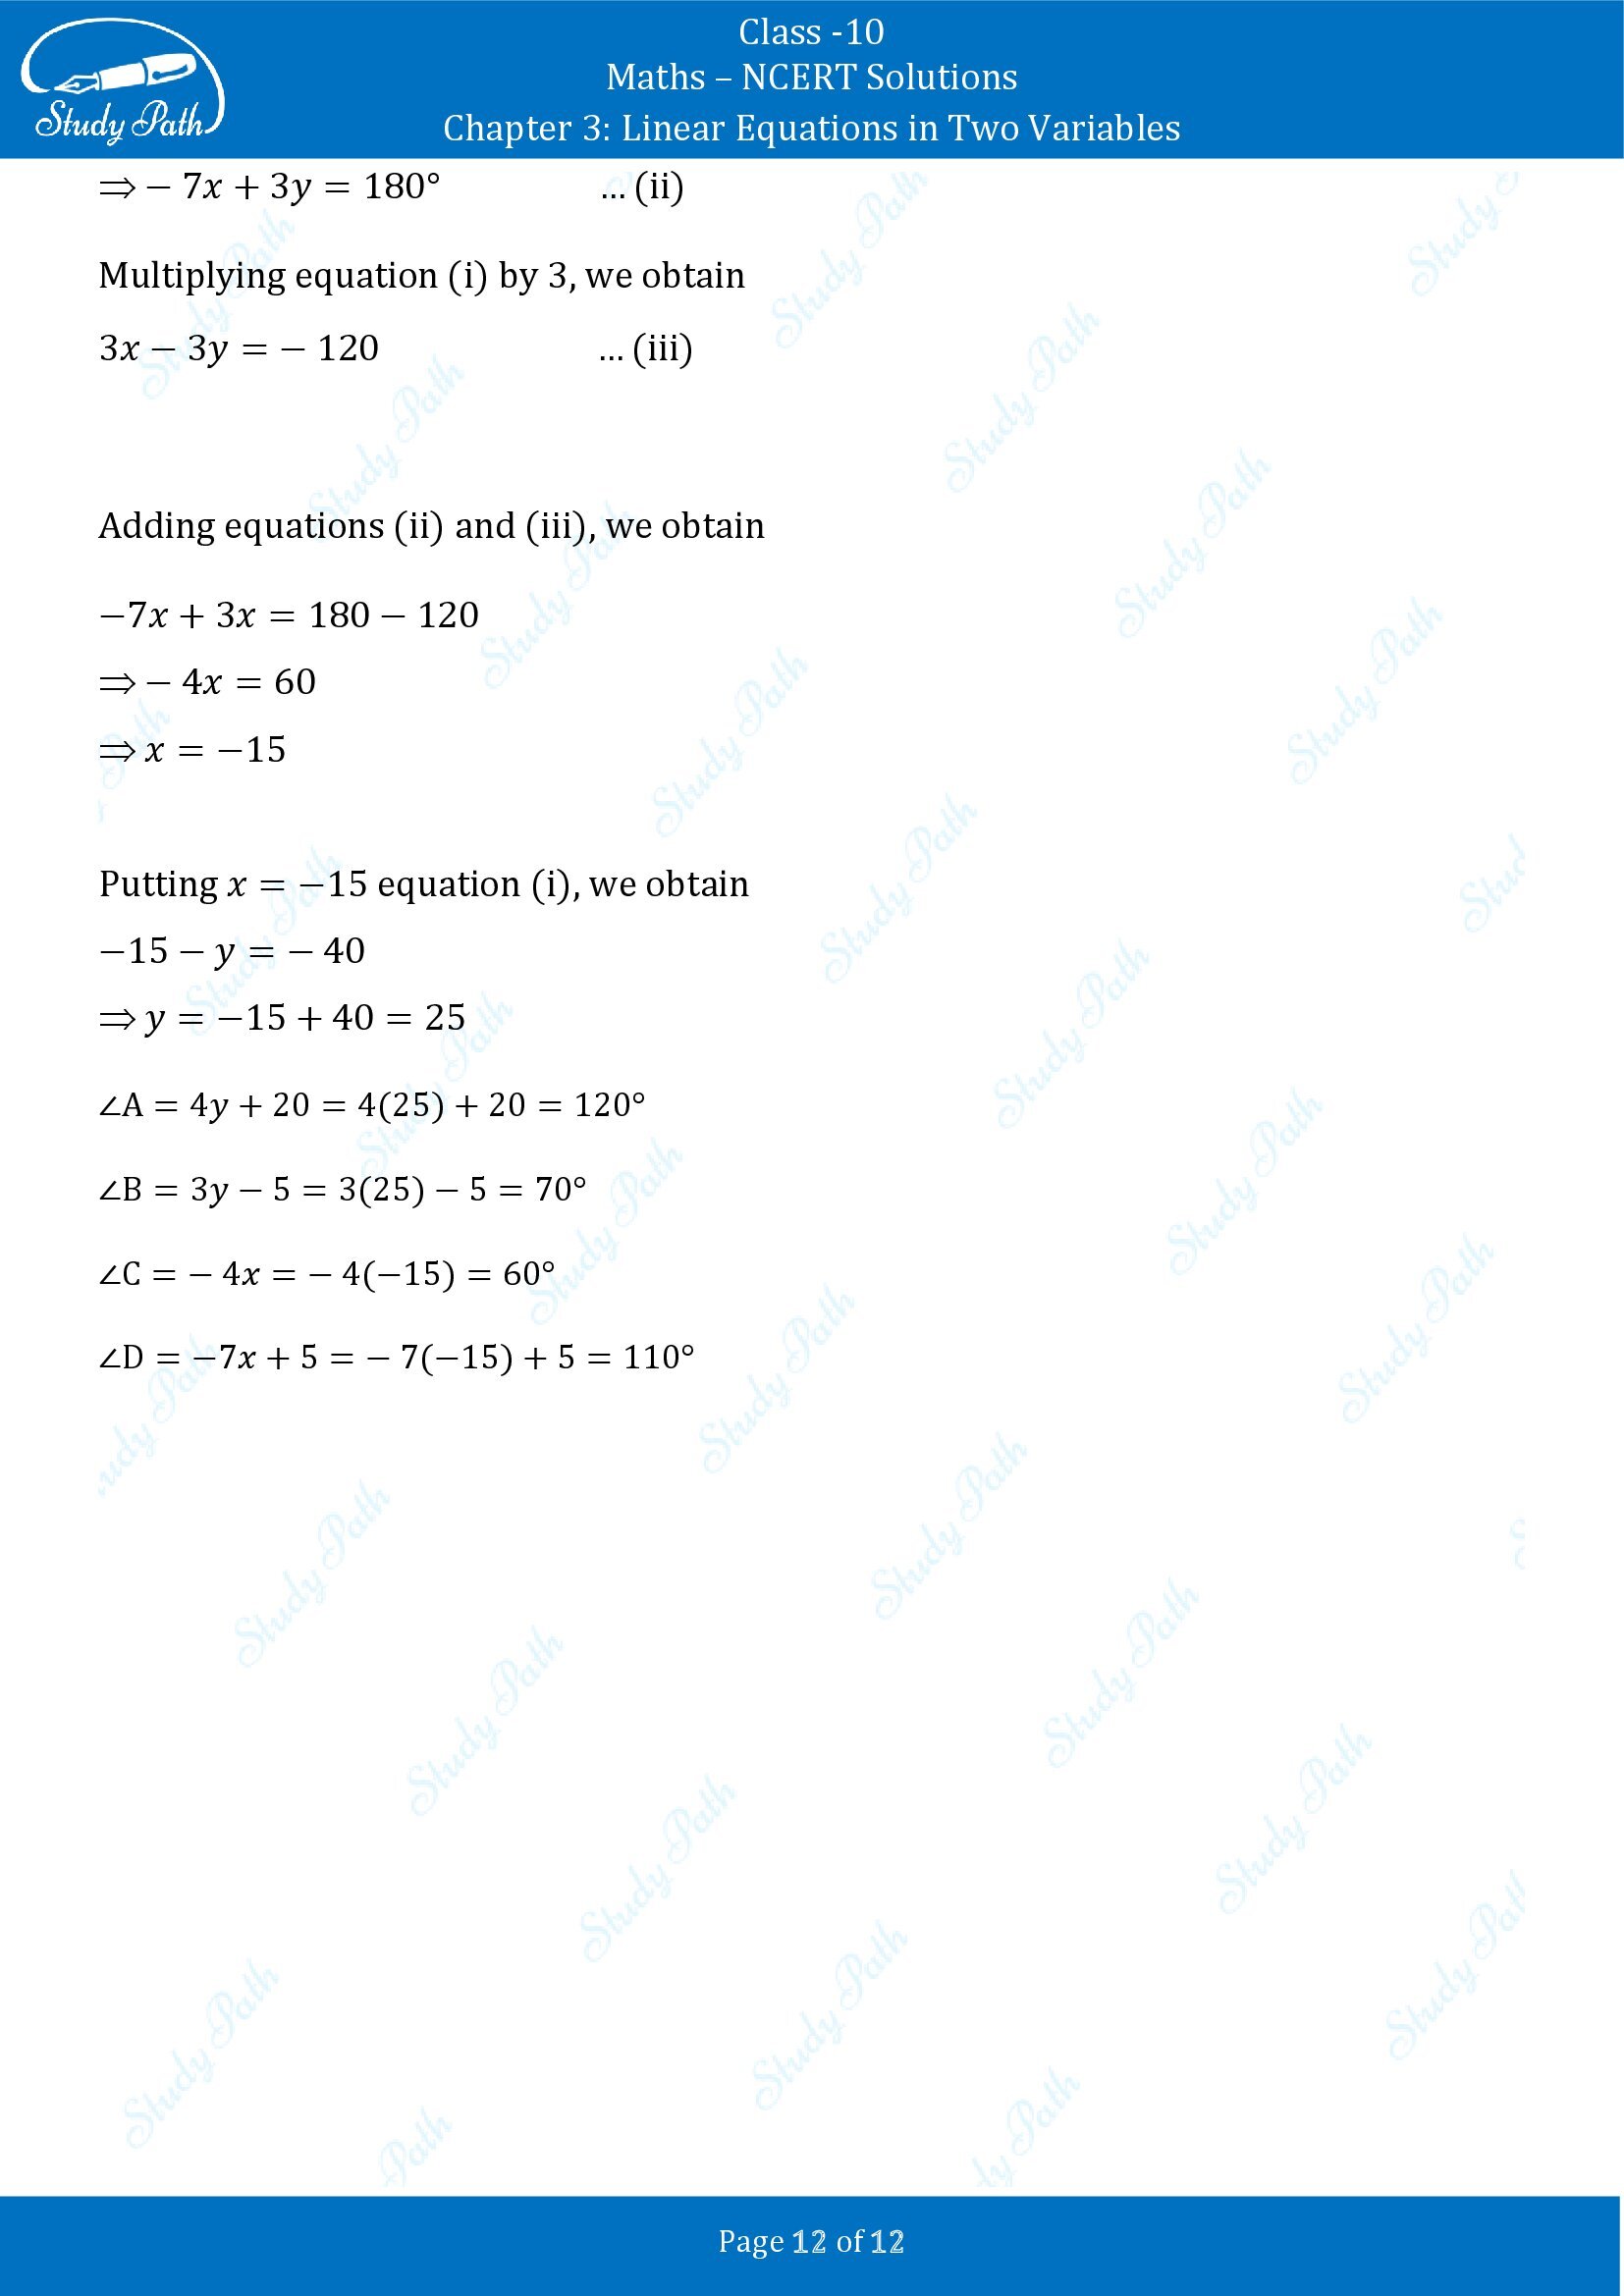 NCERT Solutions for Class 10 Maths Chapter 3 Linear Equations in Two Variables Exercise 3.7 00012